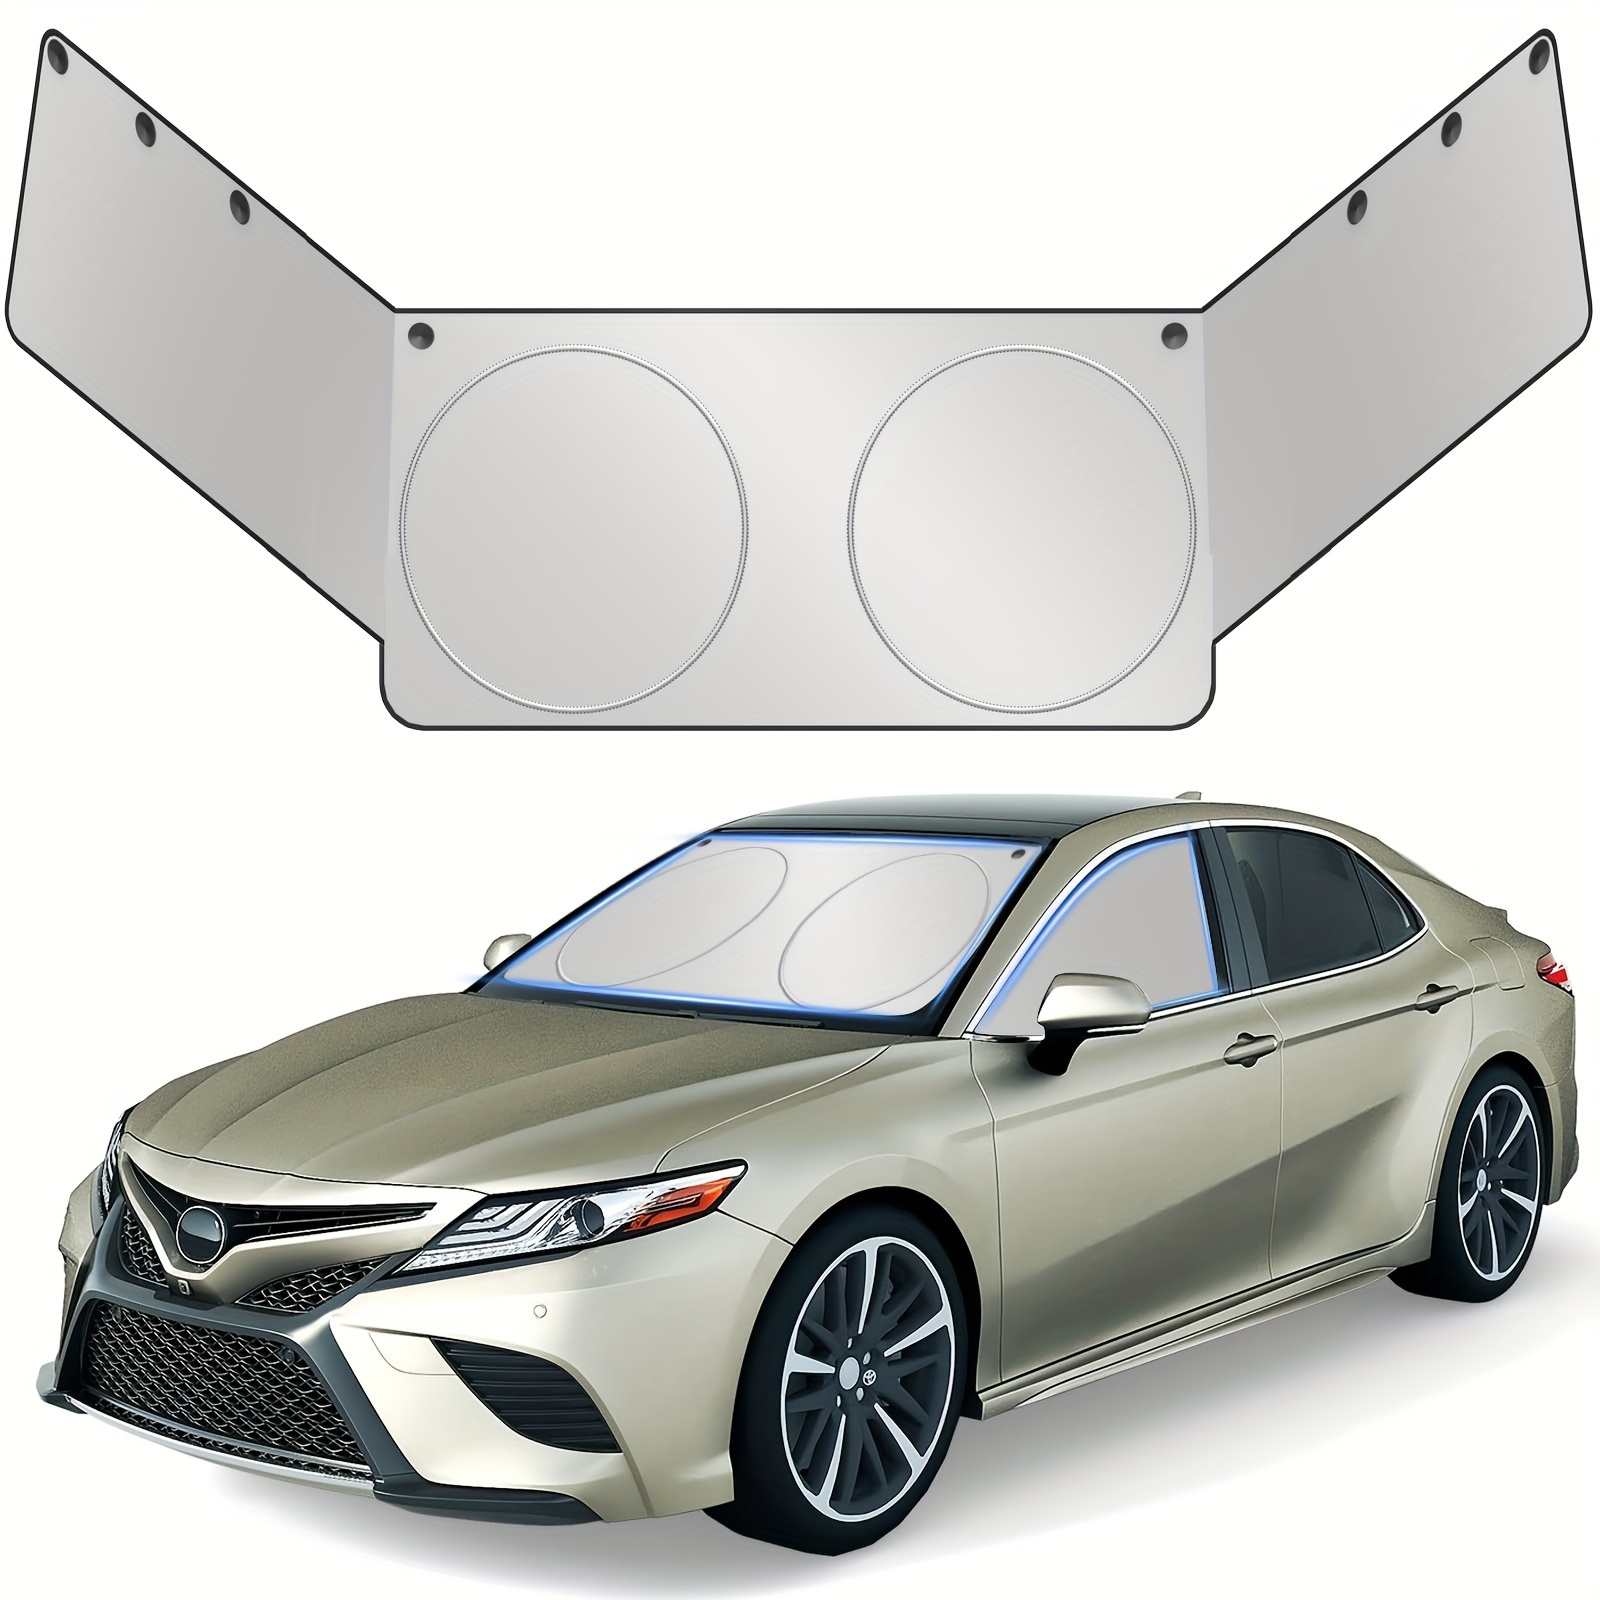 

Motomate For Windshield Sun Shade- Front And Side Window Sun Cover Block Sun Heat Protect Vehicle Interior Accessories Sunshades Prevent Prying And Protect Privacy